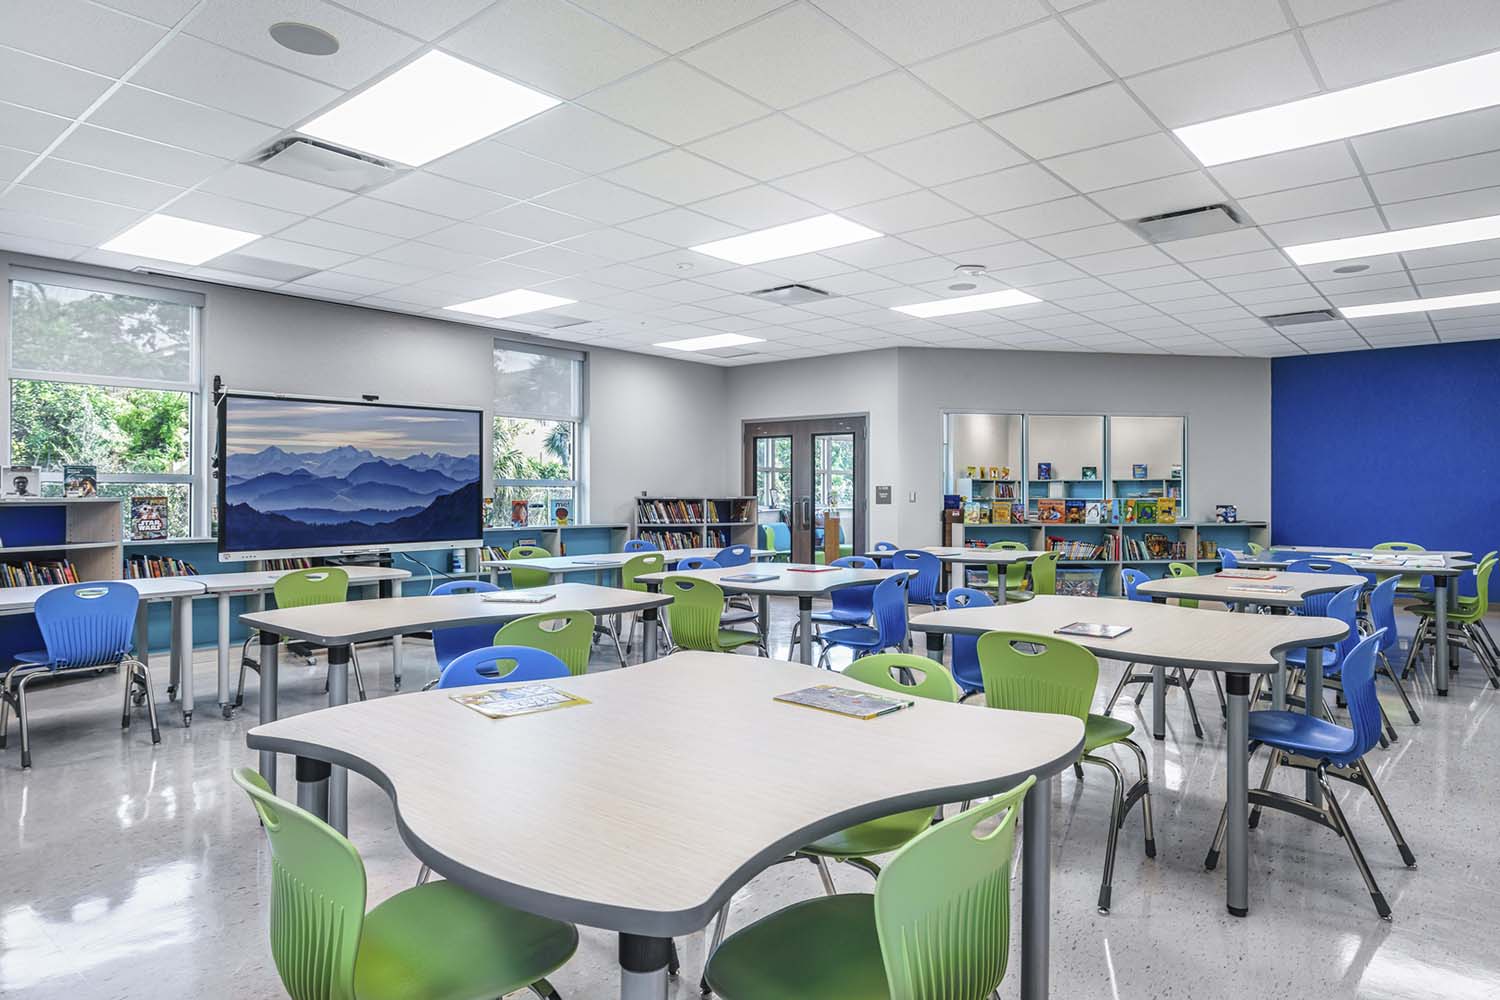 Colorful Spaces Gallery - On the Boards and More Page - Washington Elementary School